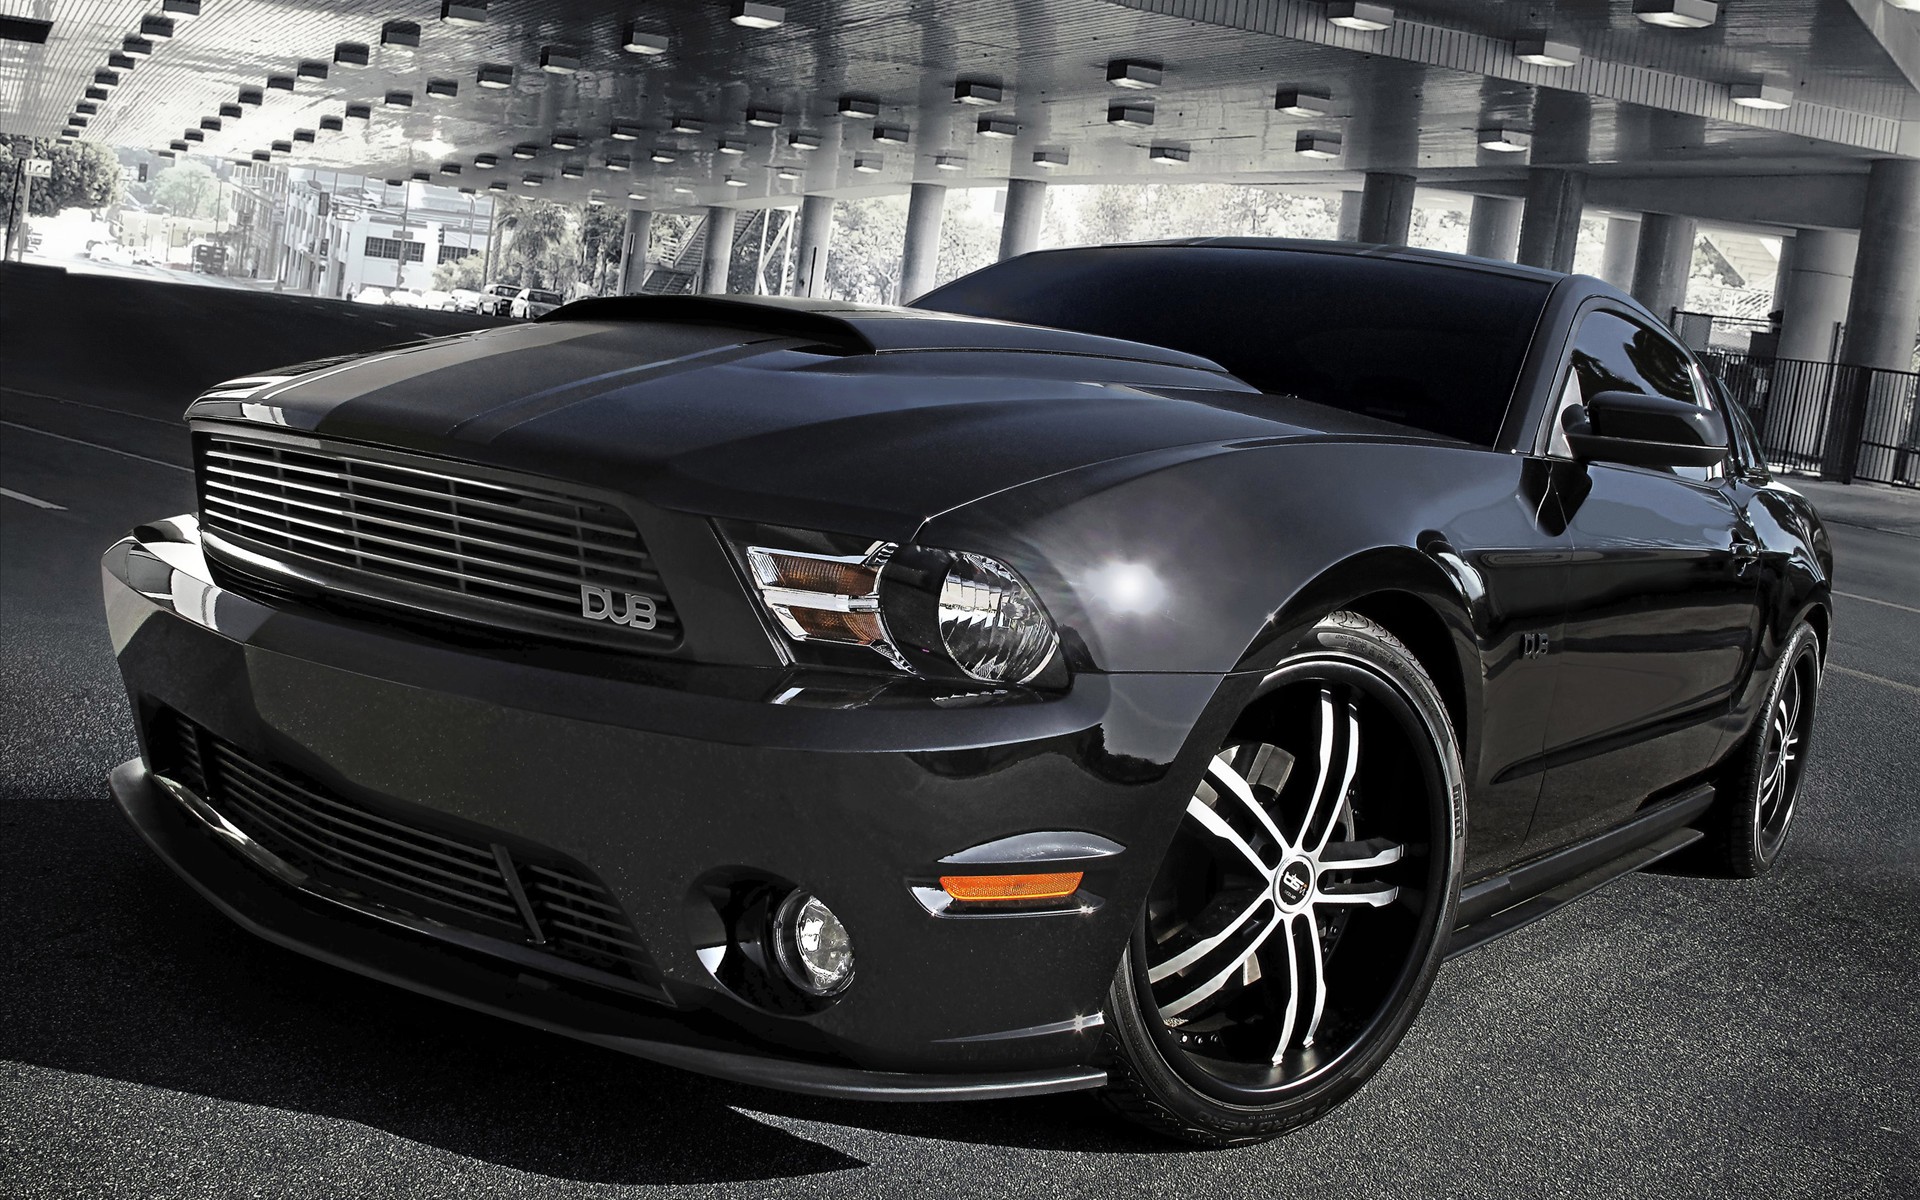 Ford Mustang DUB Edition Exclusive HD Wallpapers 5315